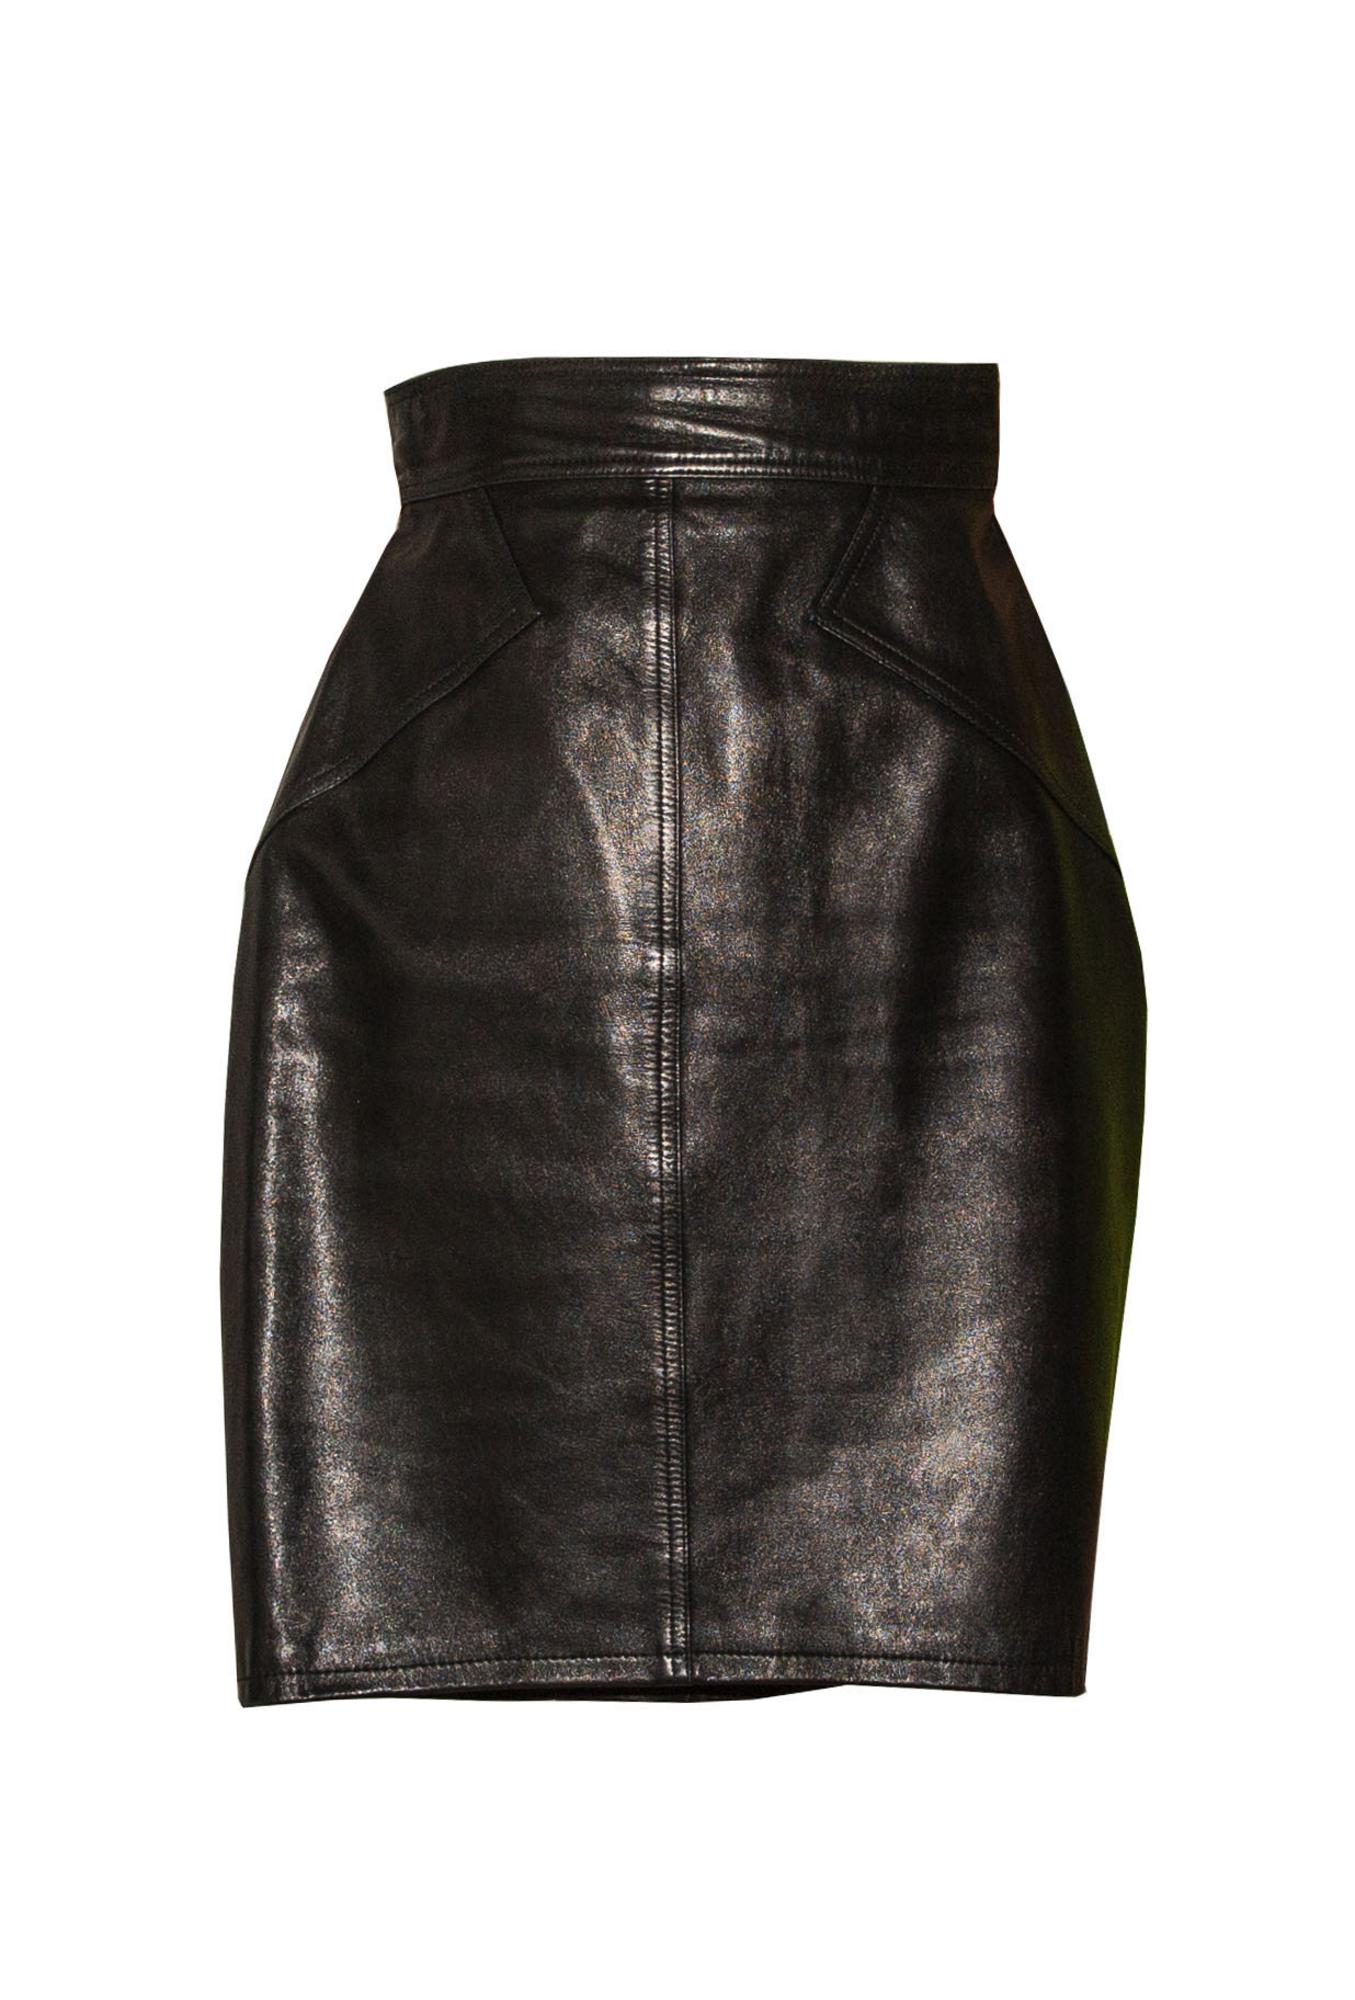 Alaia LEATHER SKIRT Description: Black leather lined top stitched skirt. Zip...